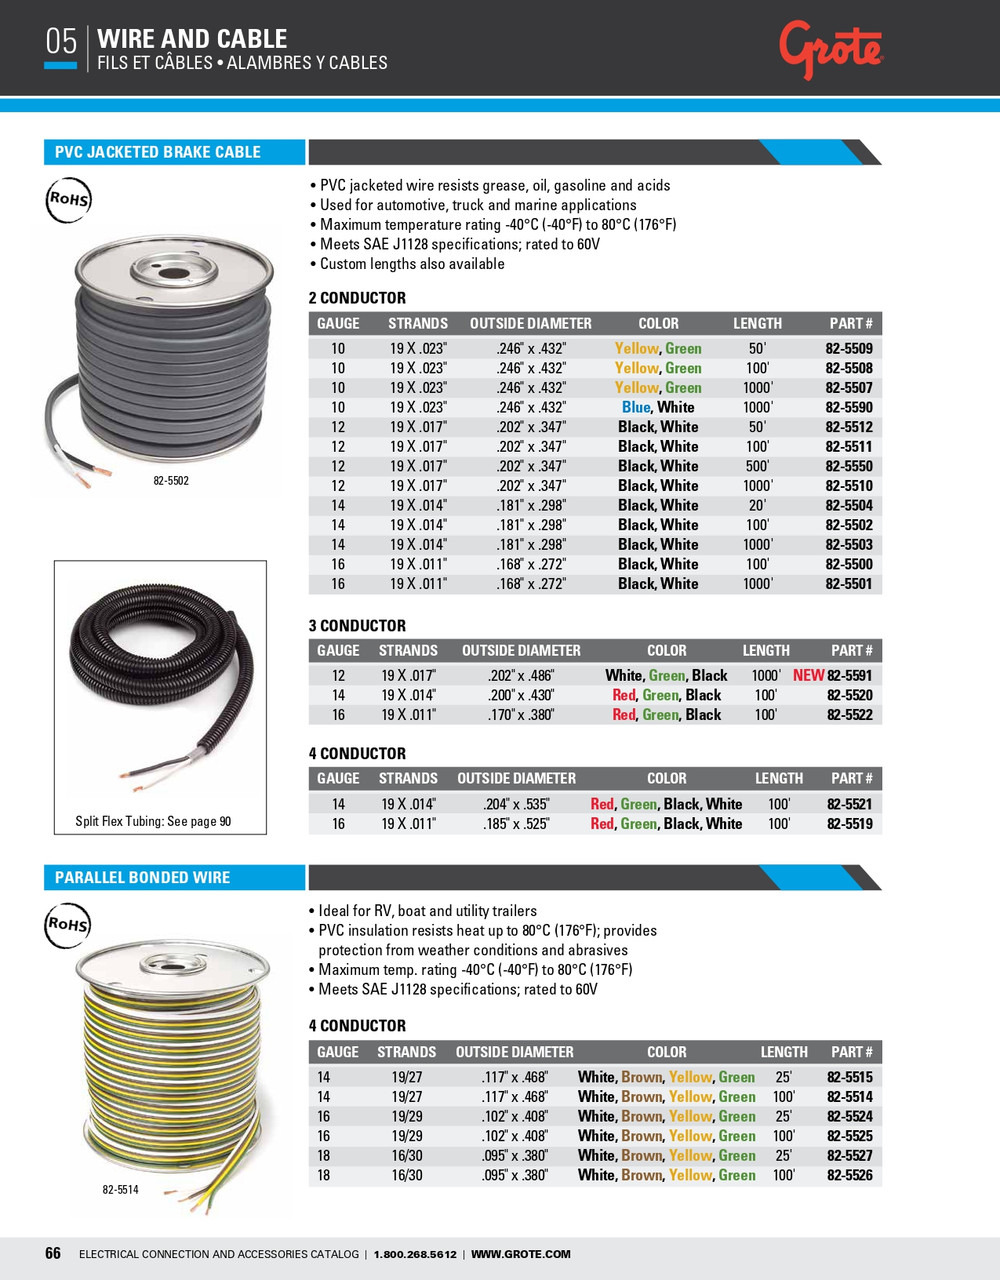 18/4 AWG Parallel Bonded Wire @ 100' - Brown/Green/White/Yellow  82-5526